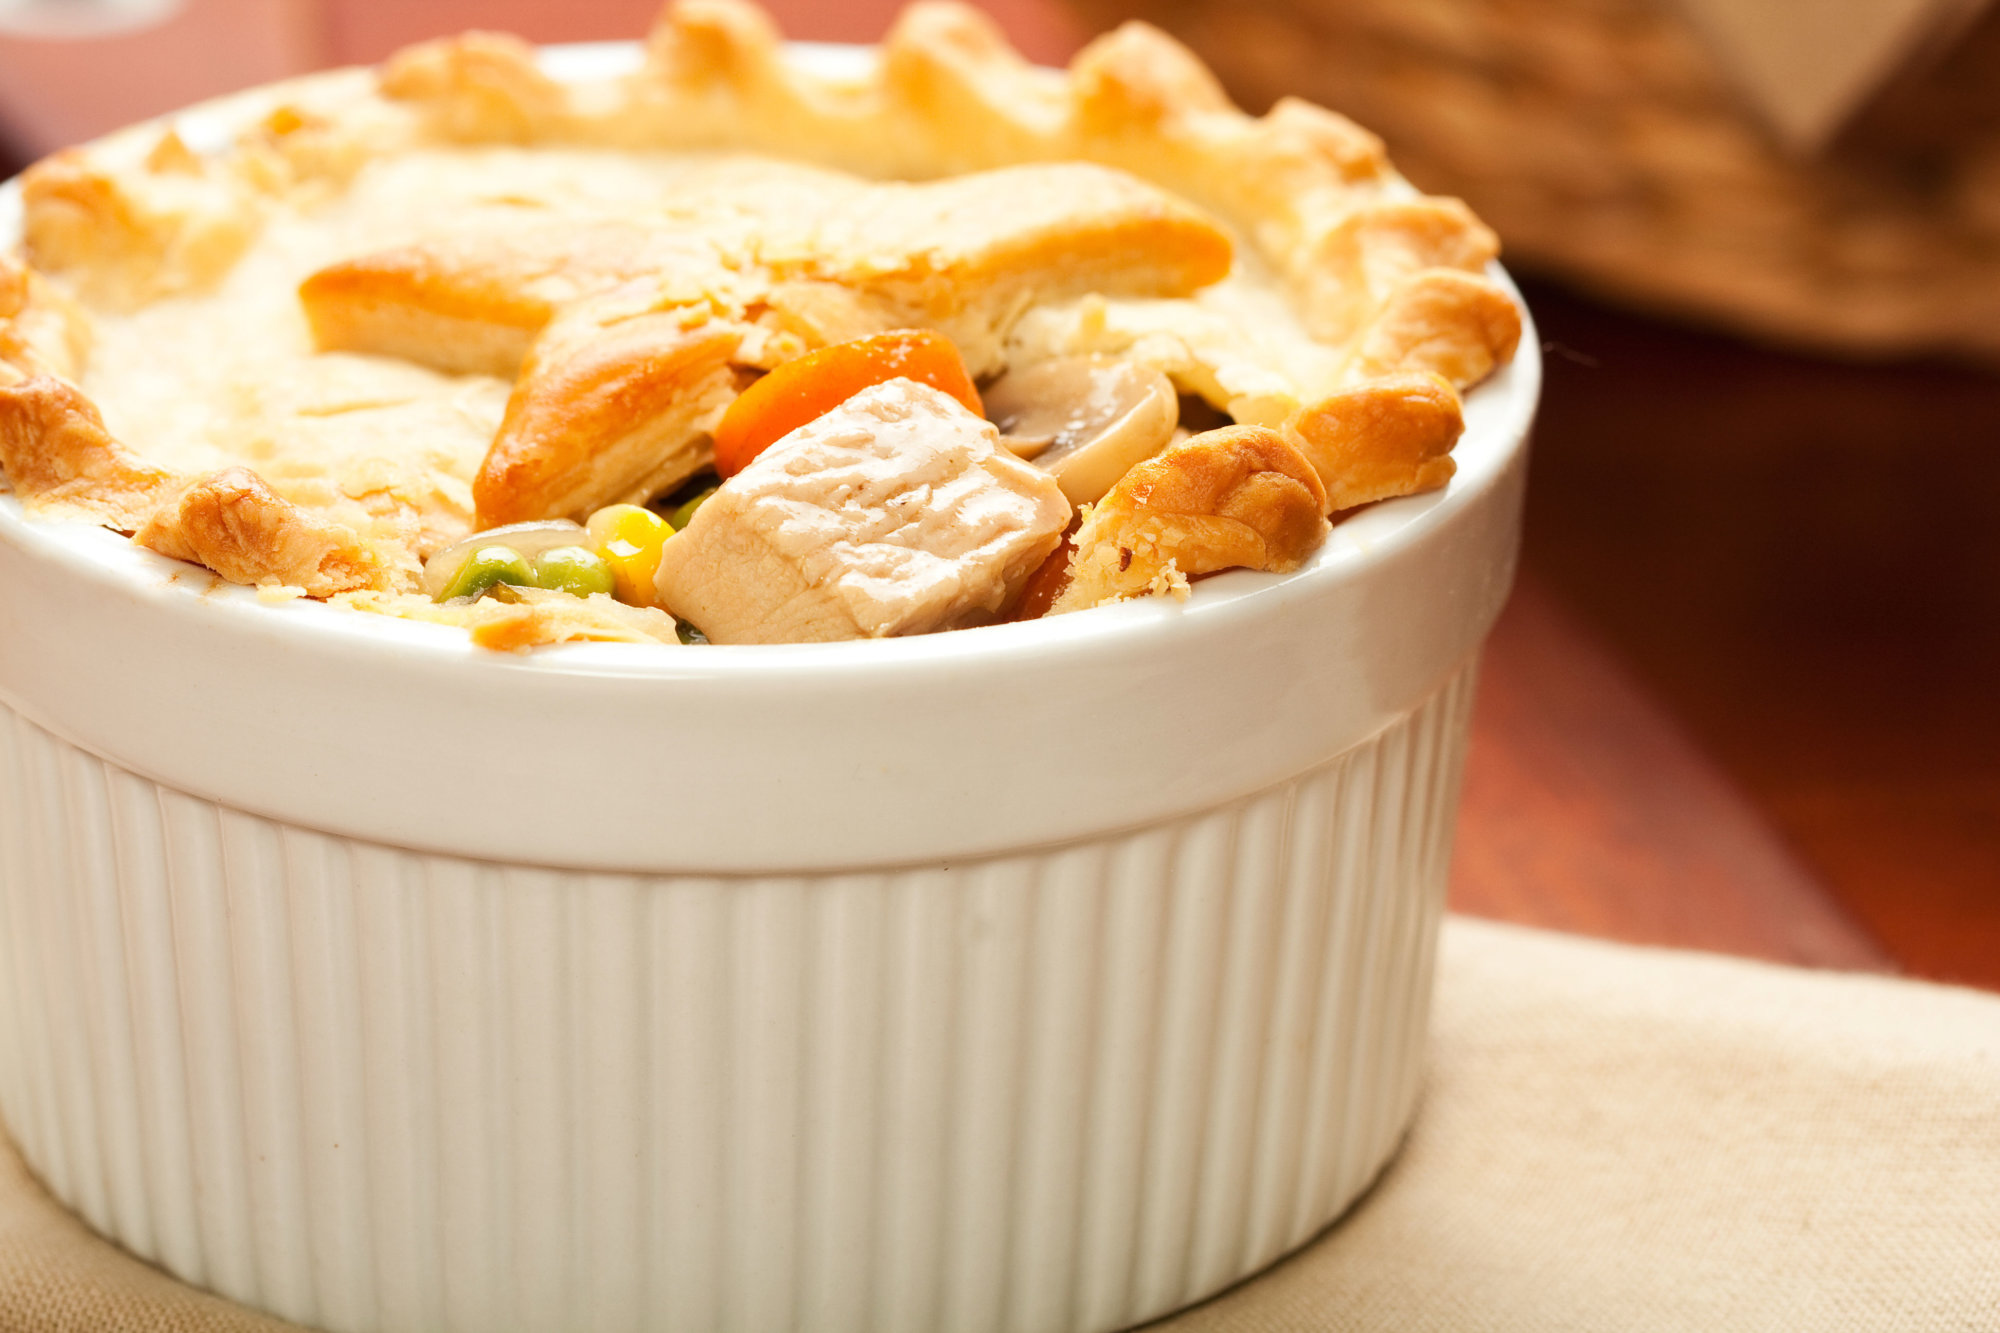 <h2><strong>Turkey pot pie</strong></h2>
<p>One way to use up leftover turkey — and any loose carrots and celery in the crisper drawer — is to cover it in a blanket of buttery pastry.</p>
<p><a href="https://www.foodnetwork.com/recipes/katie-lee/thanksgiving-pot-pie-5618473" target="_blank" rel="noopener">The Food Network offers a number of recipes including this one</a>.</p>
<p>And remember, the more butter the better.</p>
